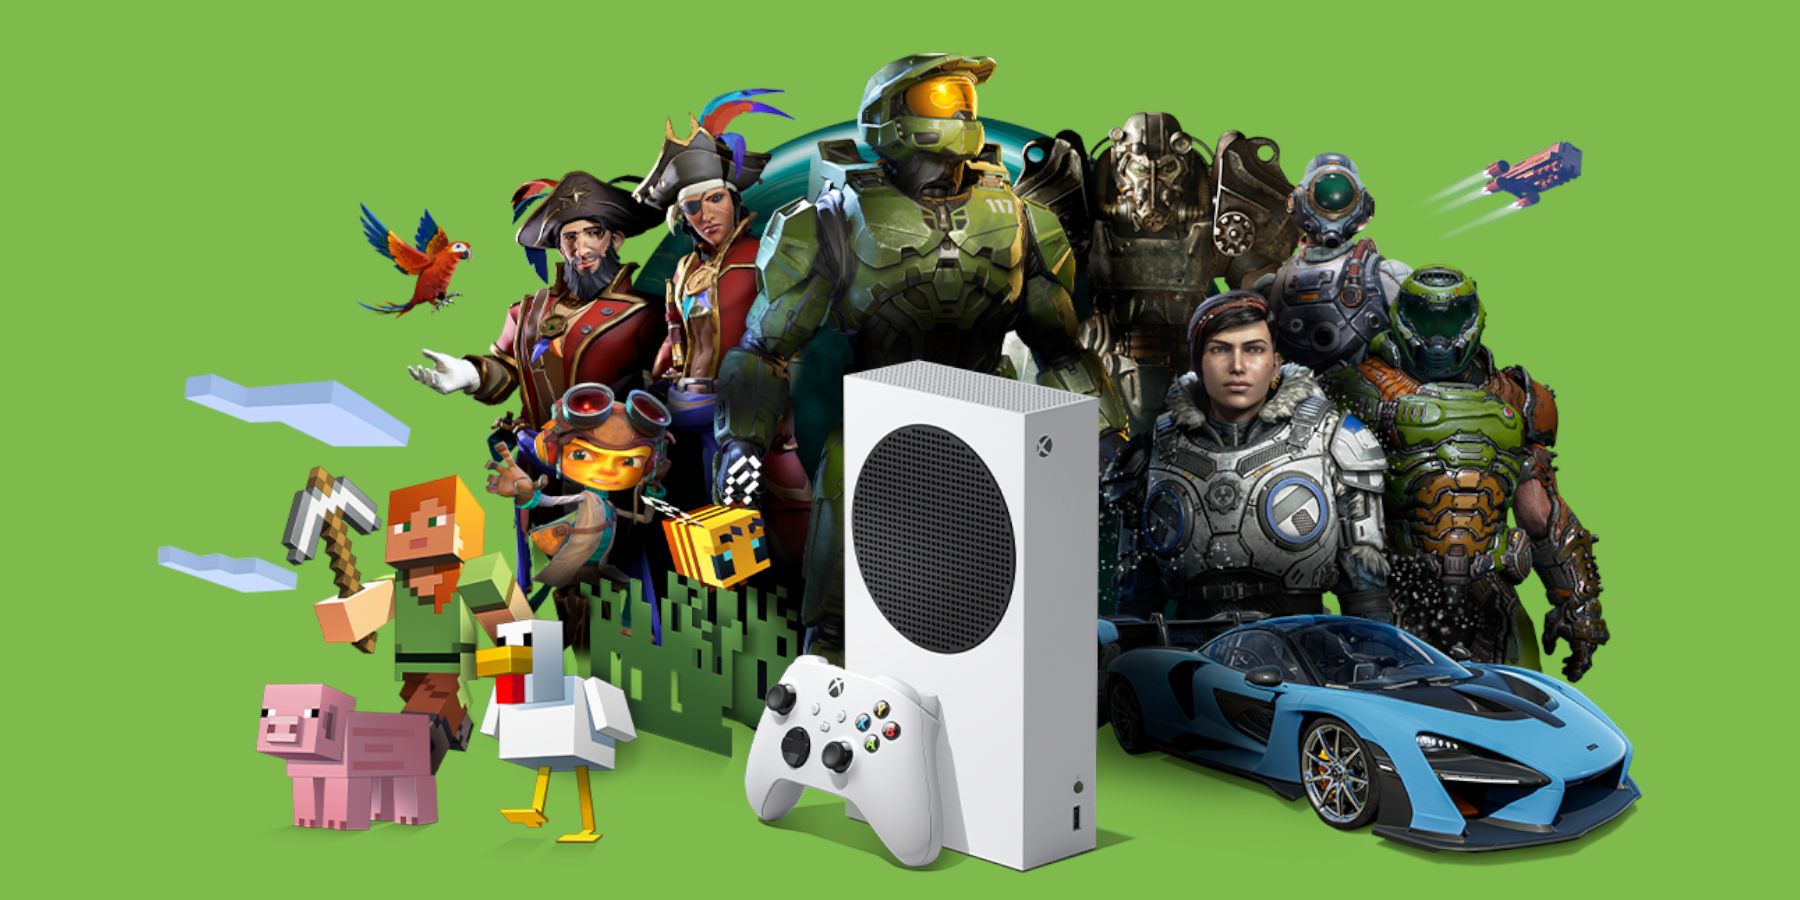 Is Xbox Series S worth it in 2022?